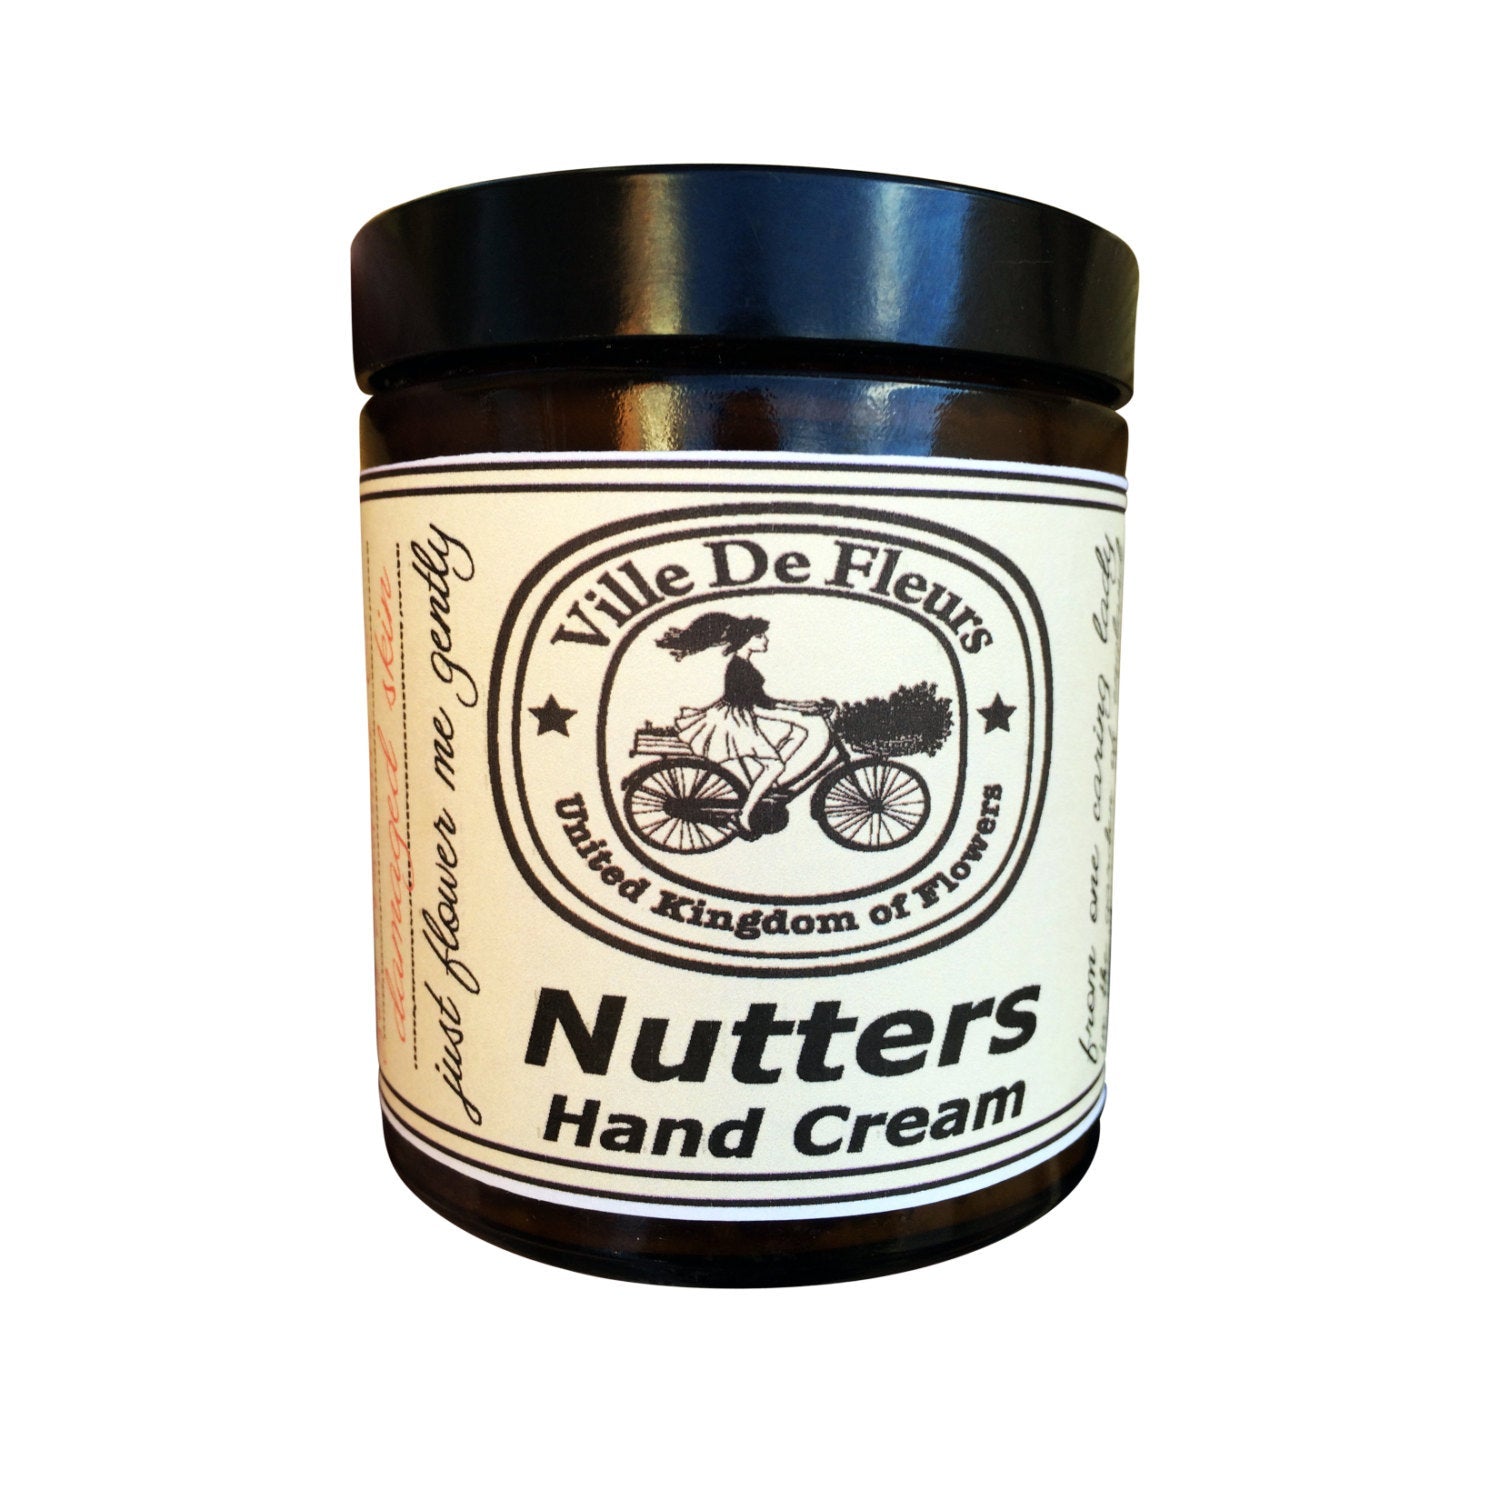 Nutters Hand Cream